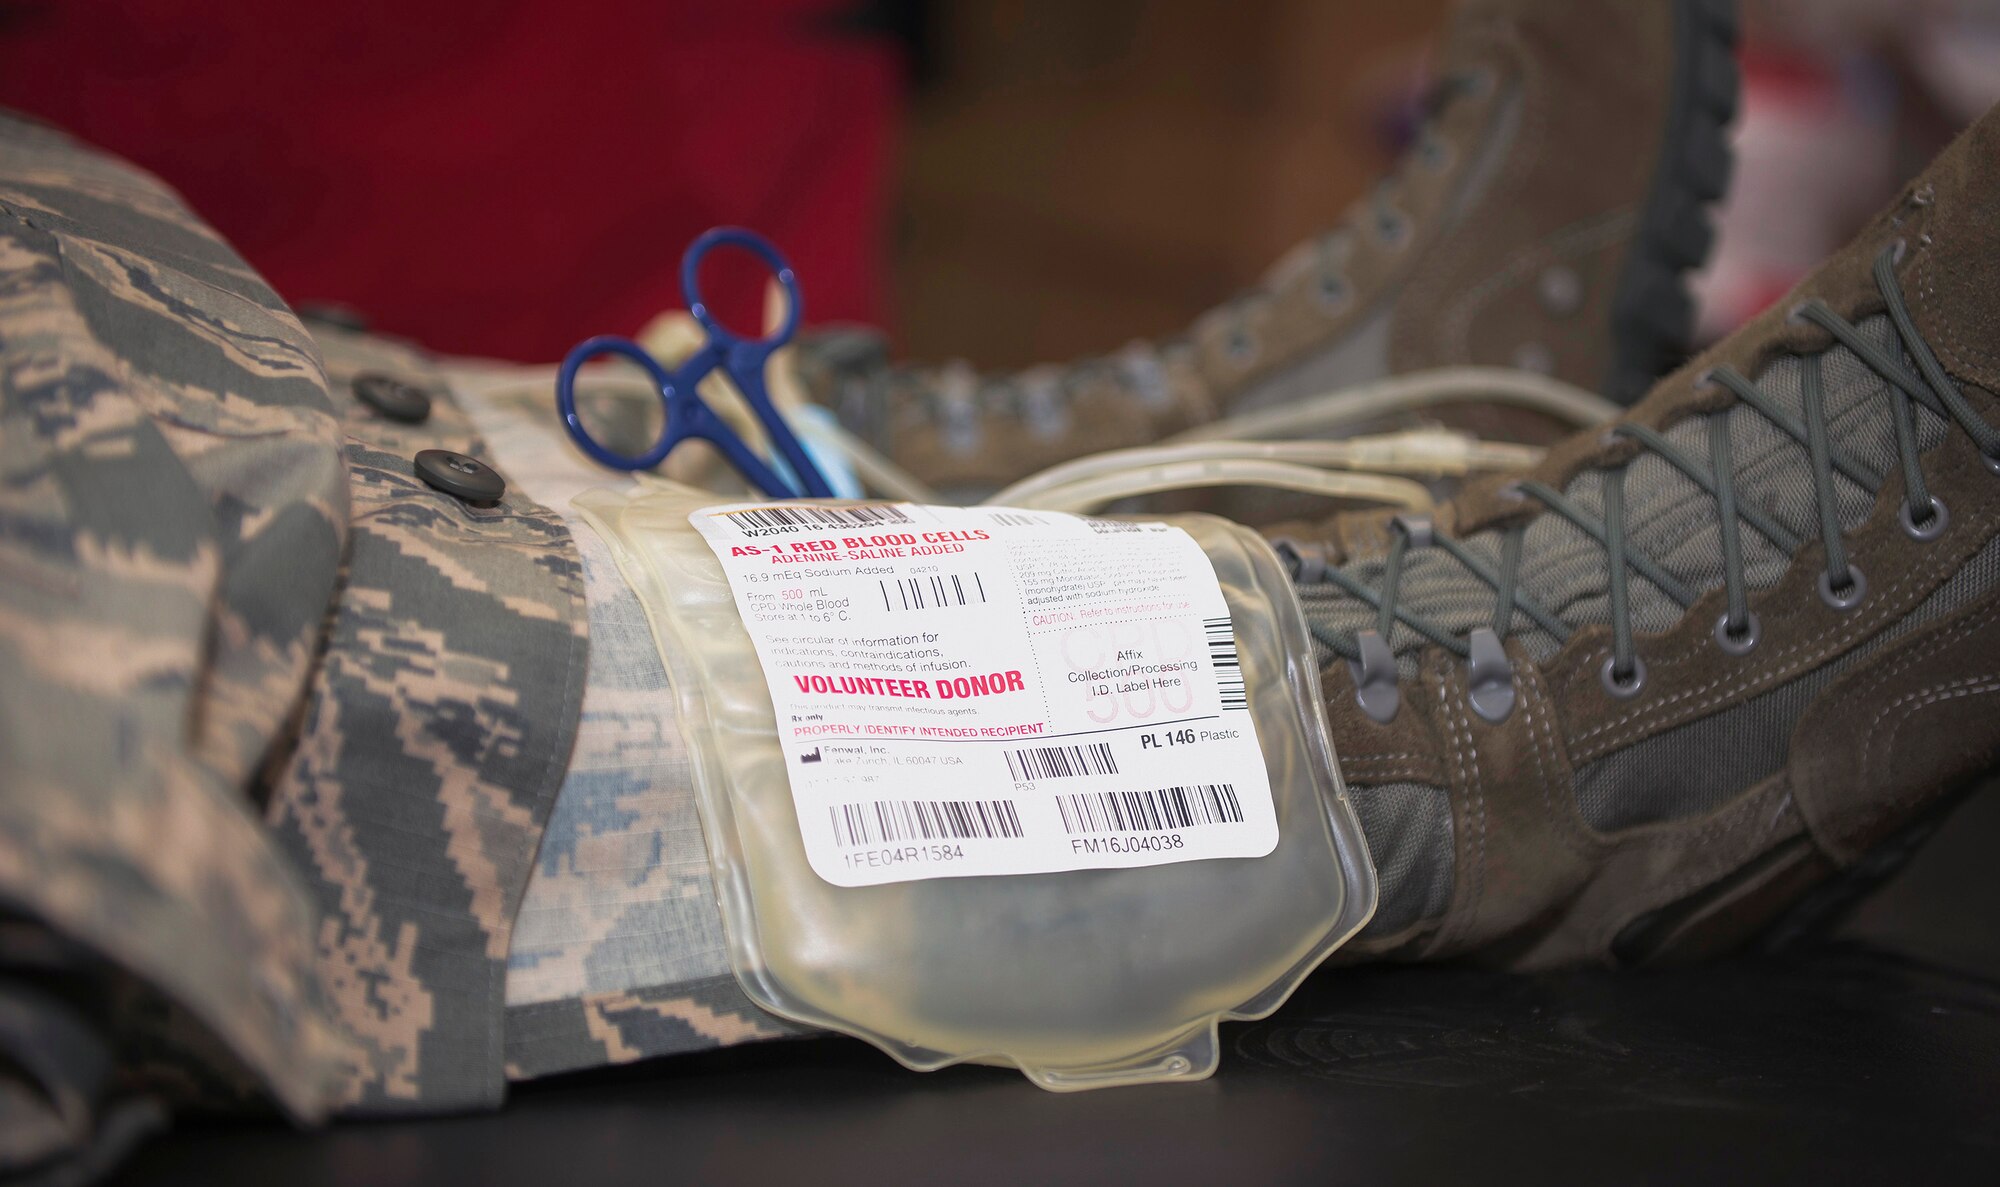 A blood donation bag rests on an Airman’s leg at an American Red Cross blood drive at the 182nd Airlift Wing in Peoria, Ill., Dec. 14, 2016. The wing’s company grade officers council hosted the event as a way for unit members to give back to their communities. (U.S. Air National Guard photo by Tech. Sgt. Lealan Buehrer)